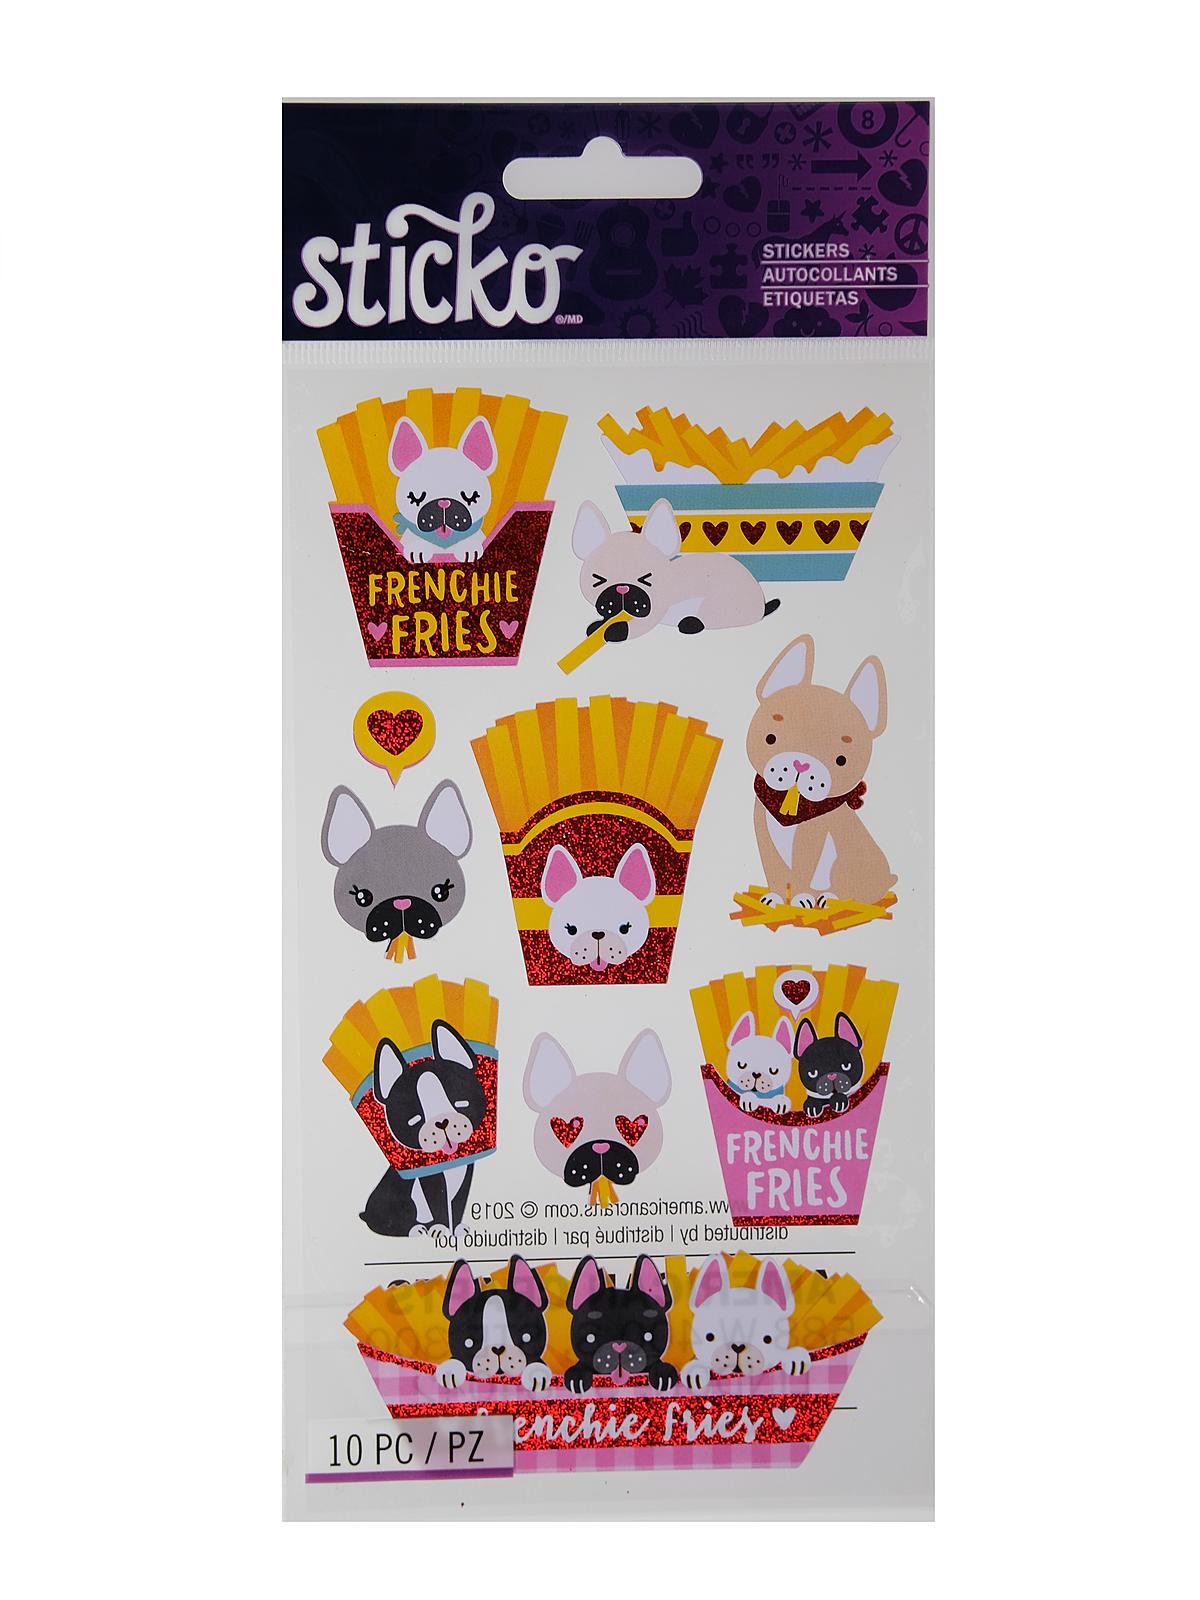 Classic Stickers Frenchie Fries 18 Pieces